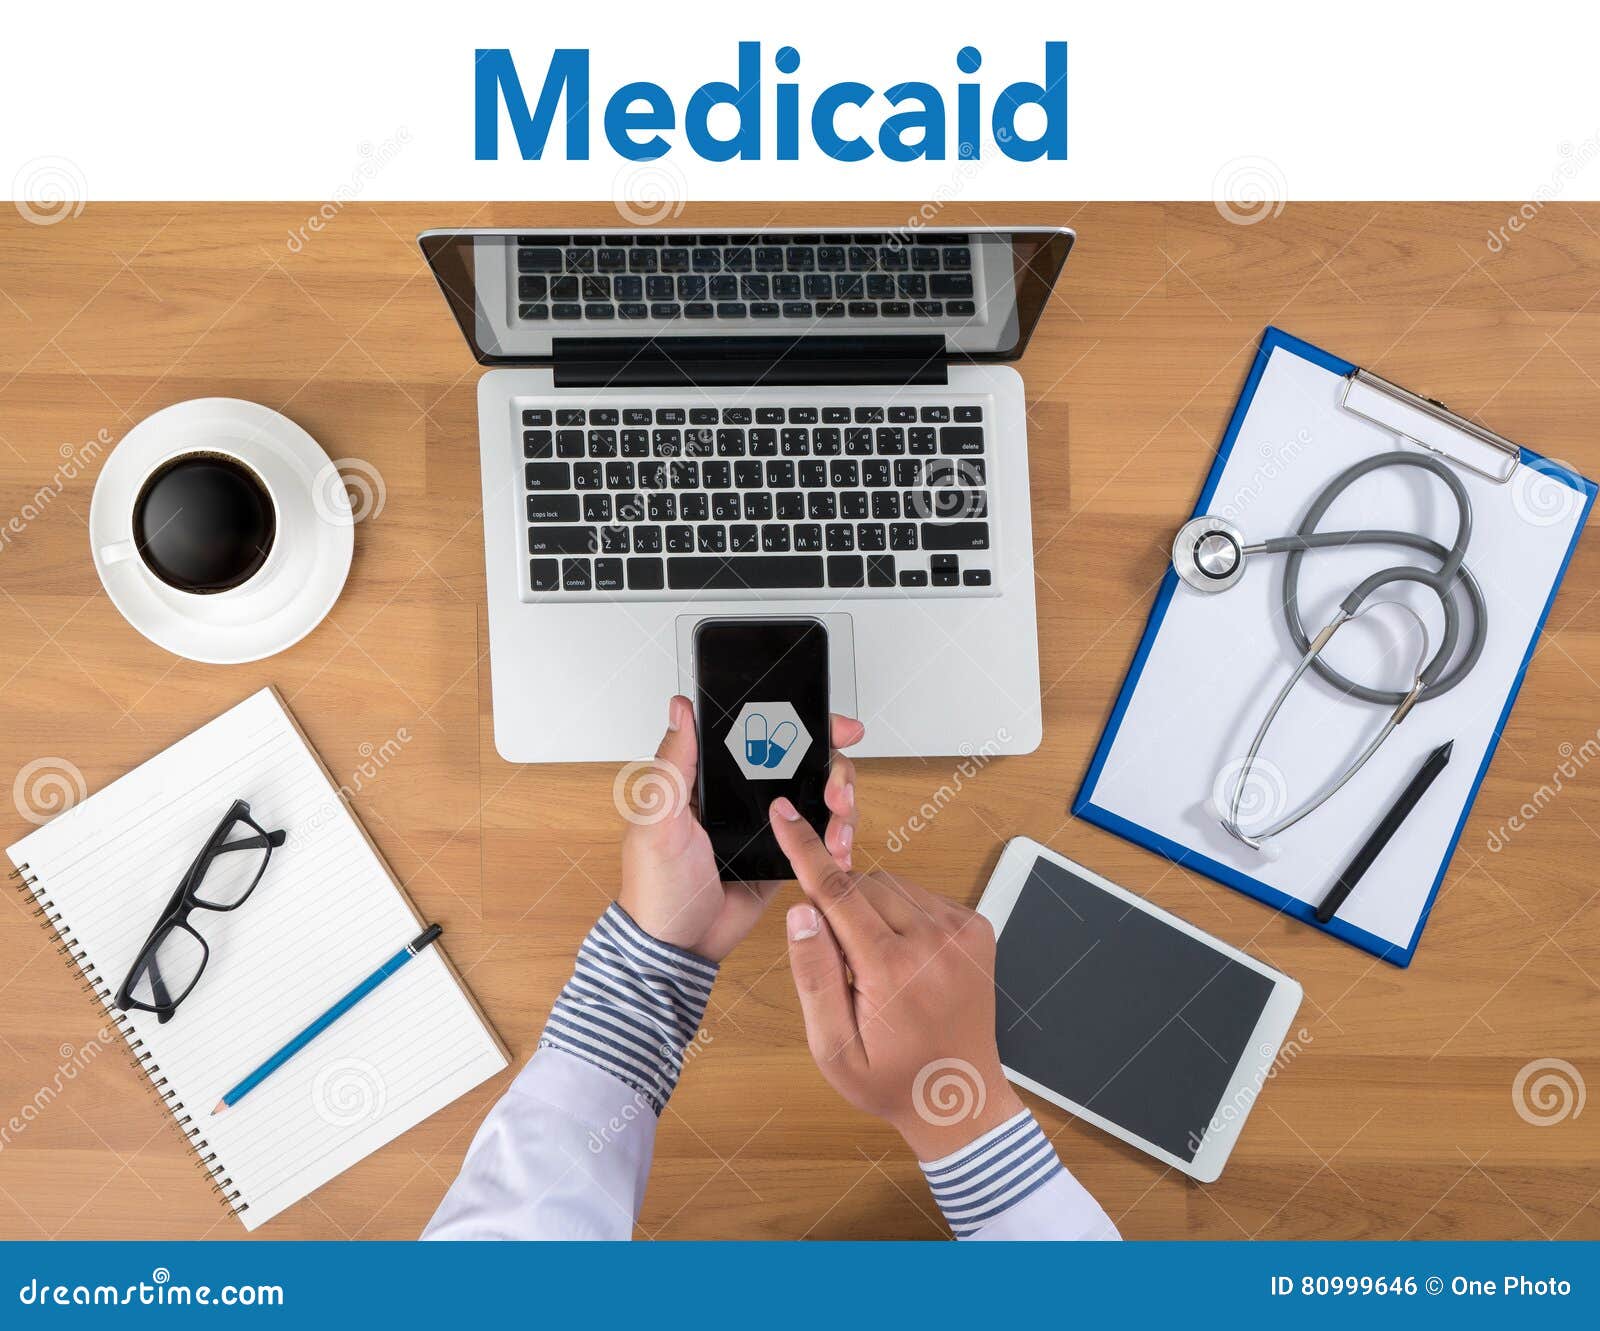 medical insurance and medicaid and stethoscope.